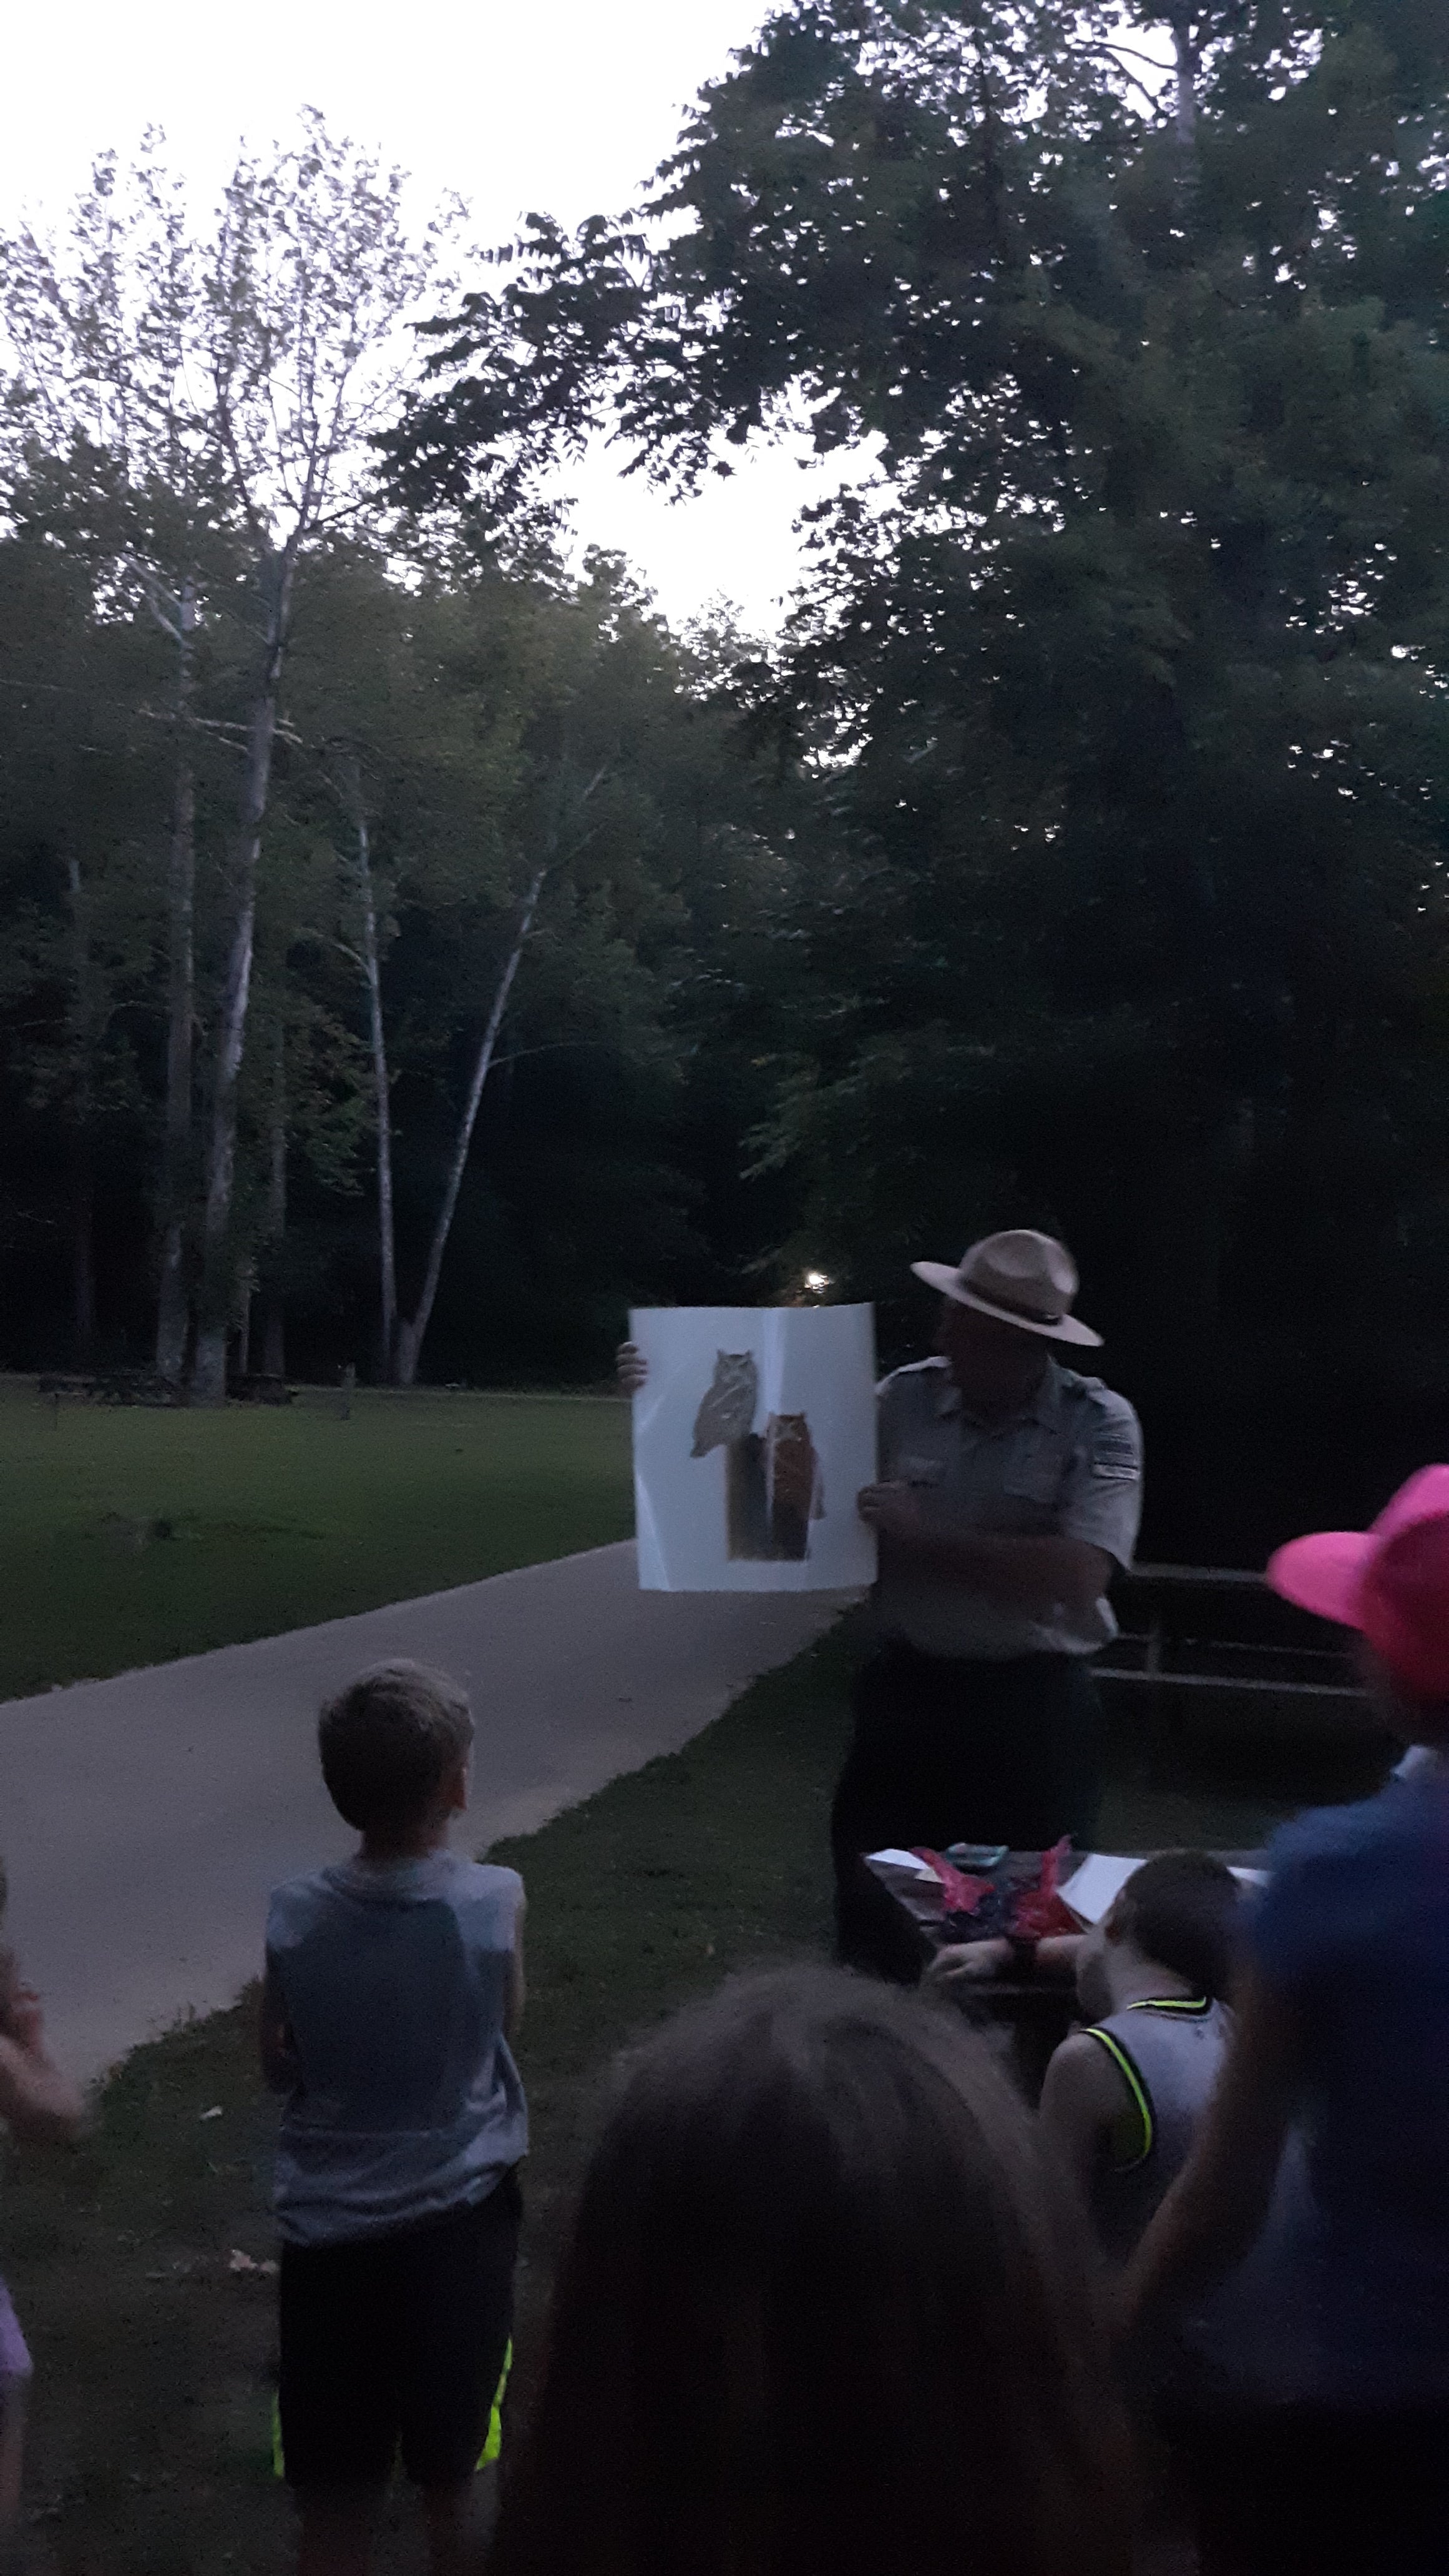 One of the many activities they offer throughout the year. We learned about owls and went on a nighttime nature hike.